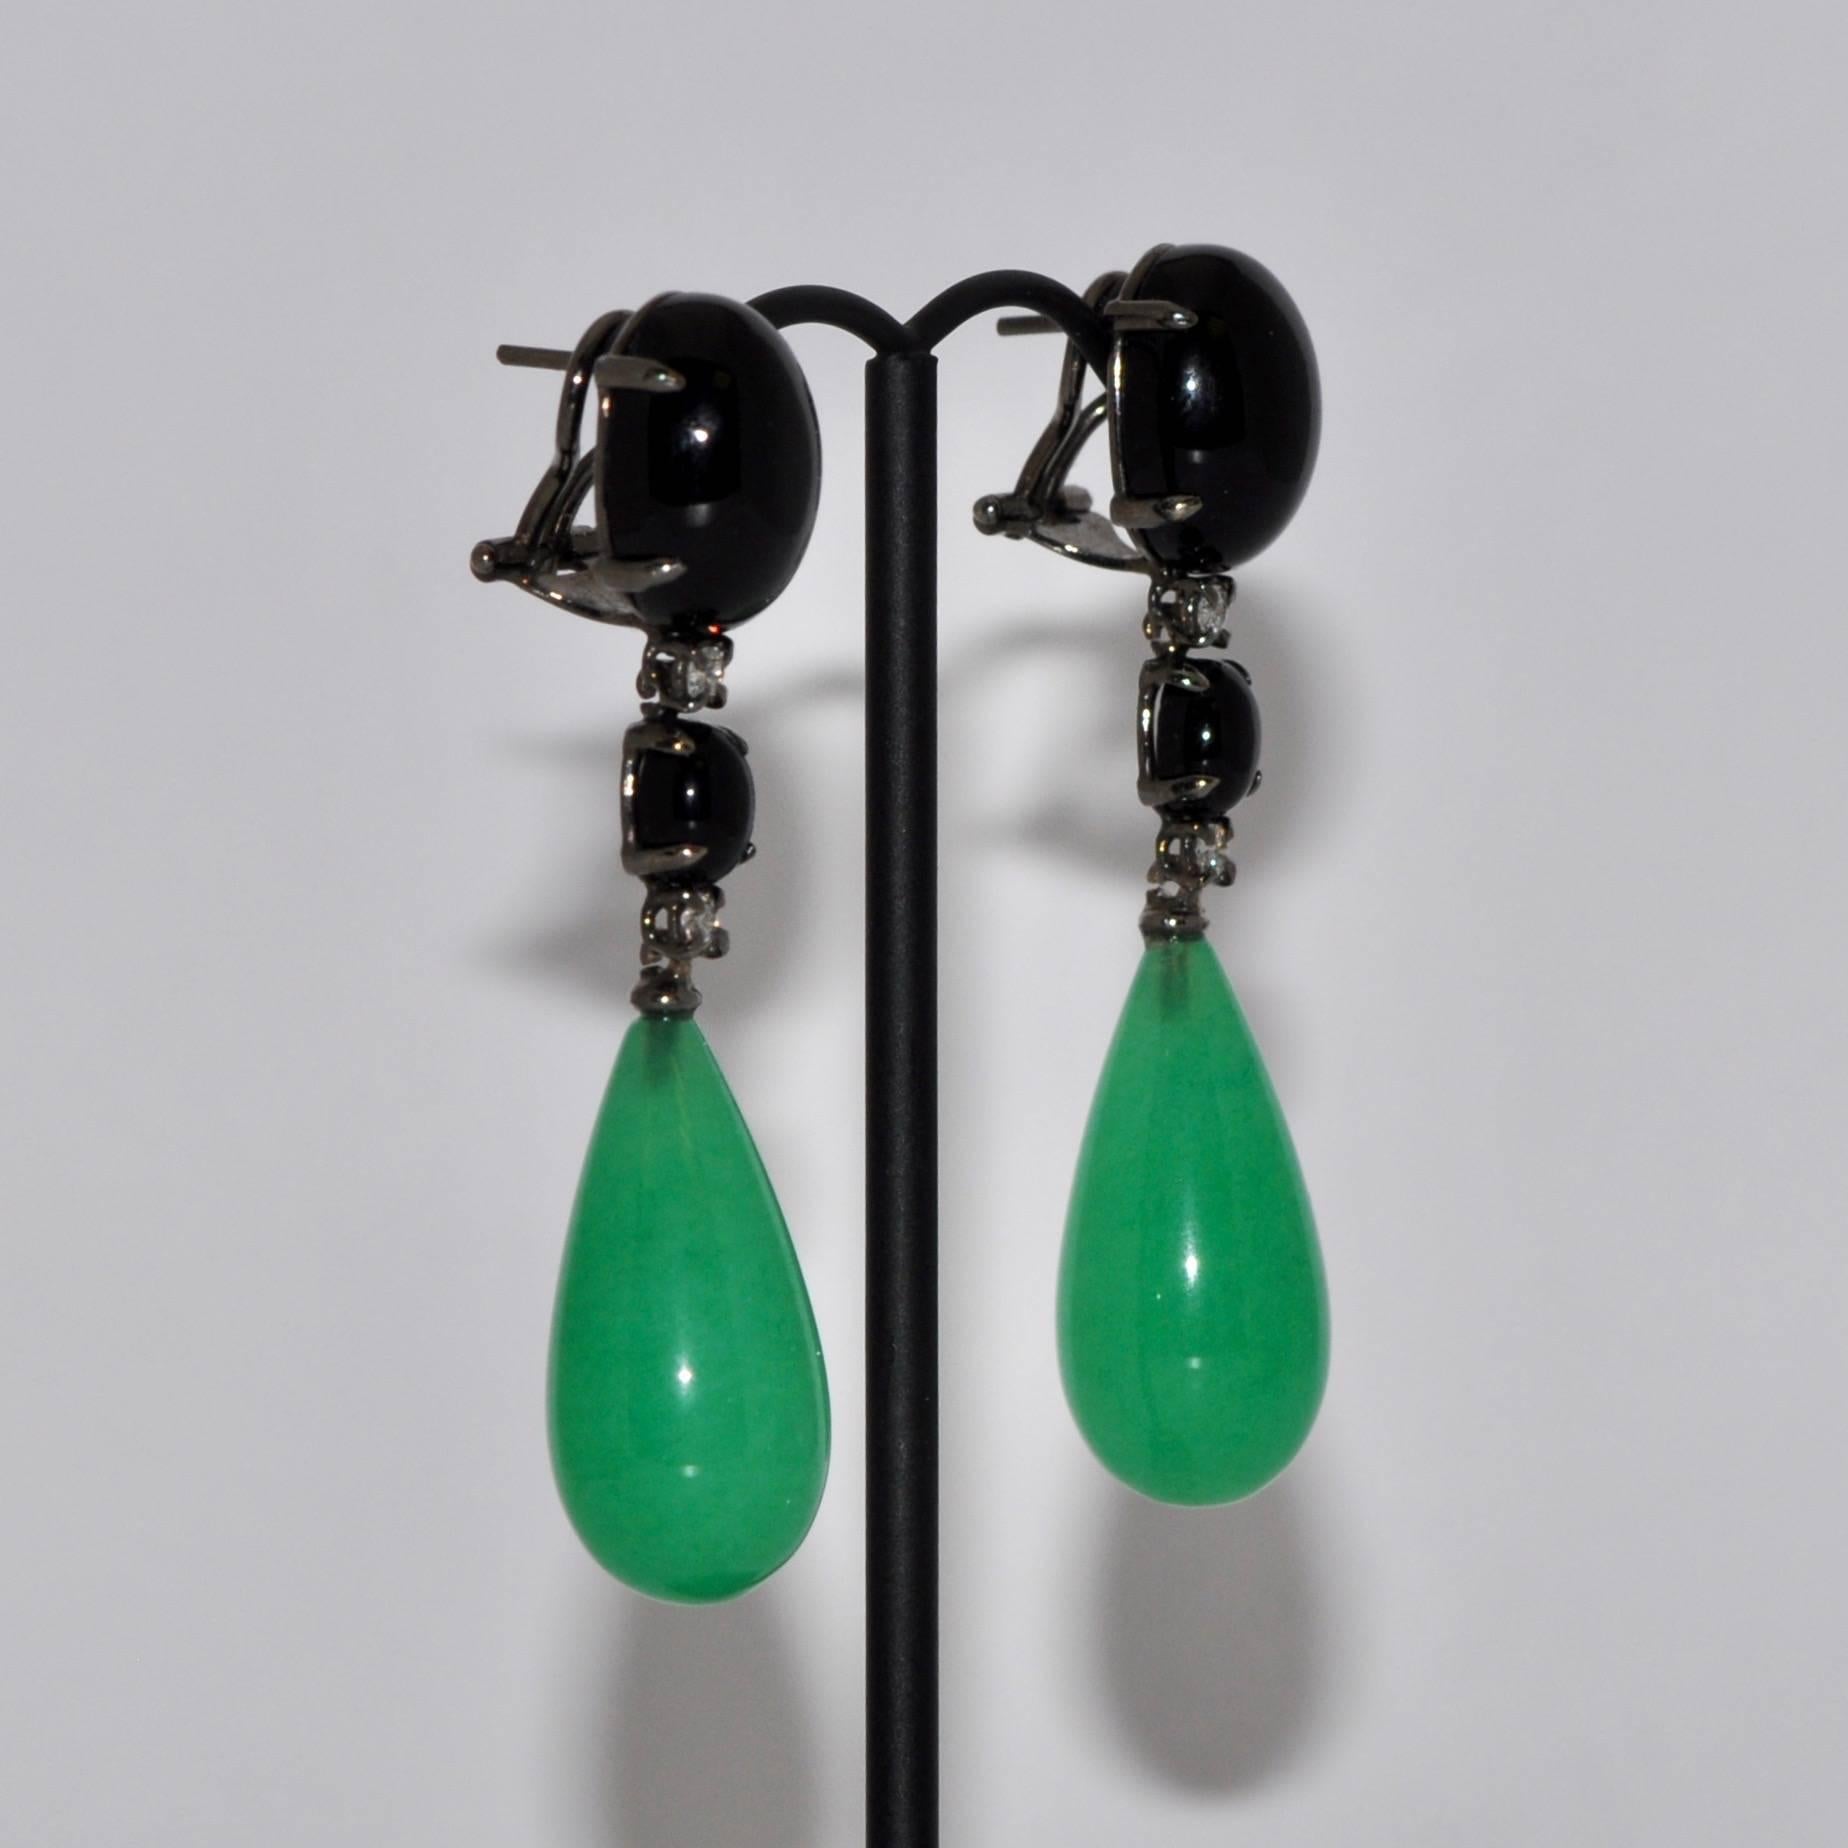 Discover this Jade, Black Agate and White Diamonds on Black Gold Chandelier Earrings.
Jade
Black Agate
White Diamonds 0.28 Carat
Black Gold 18 Carat